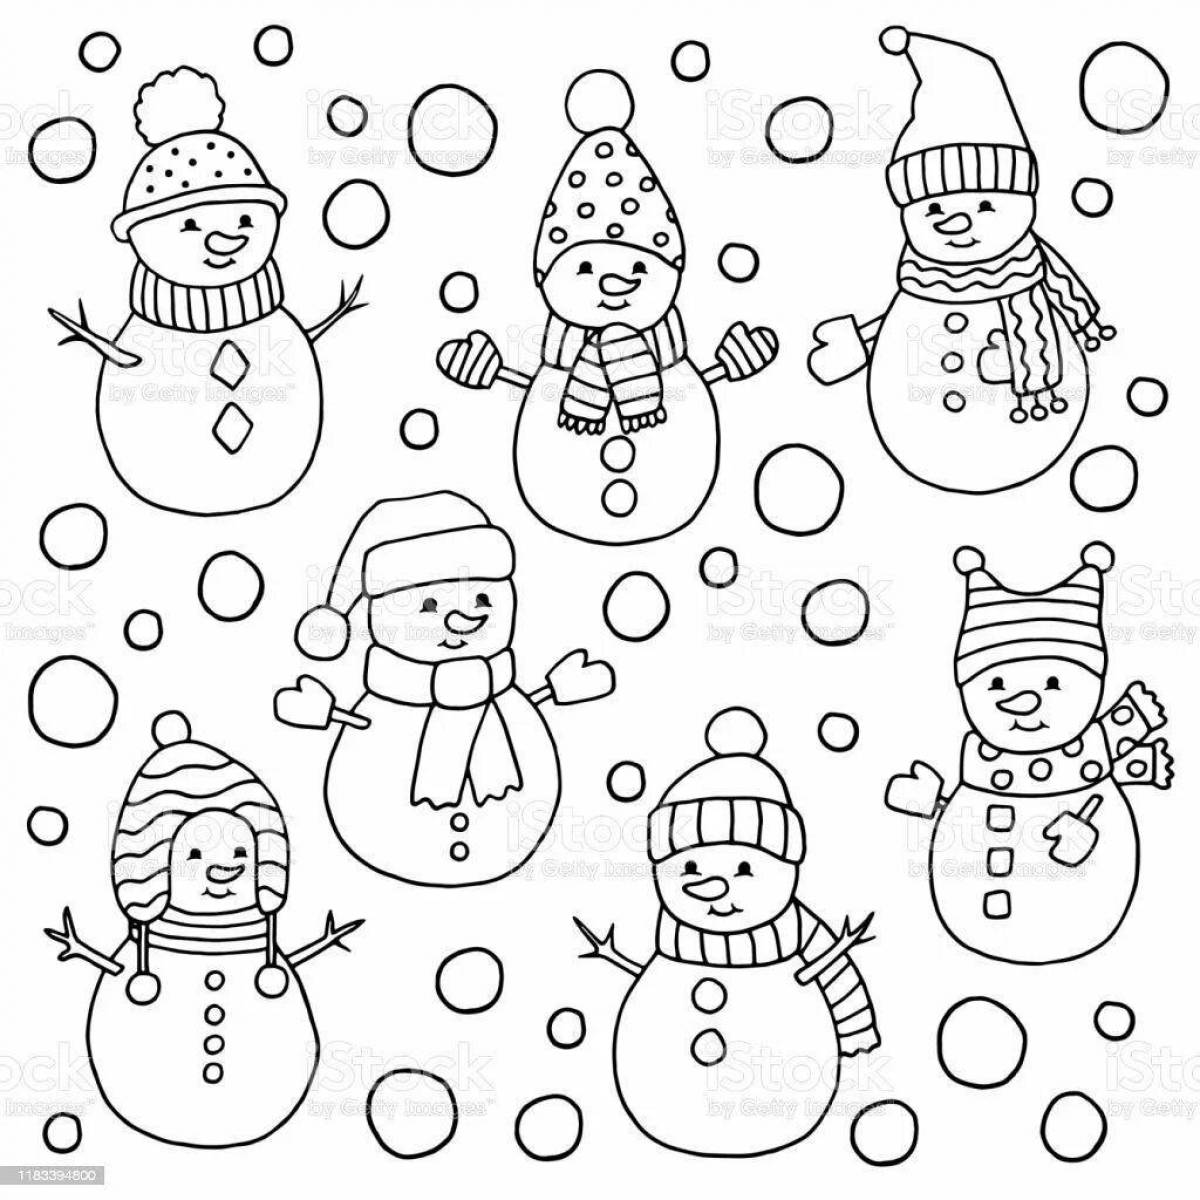 Colorful snowman family coloring page